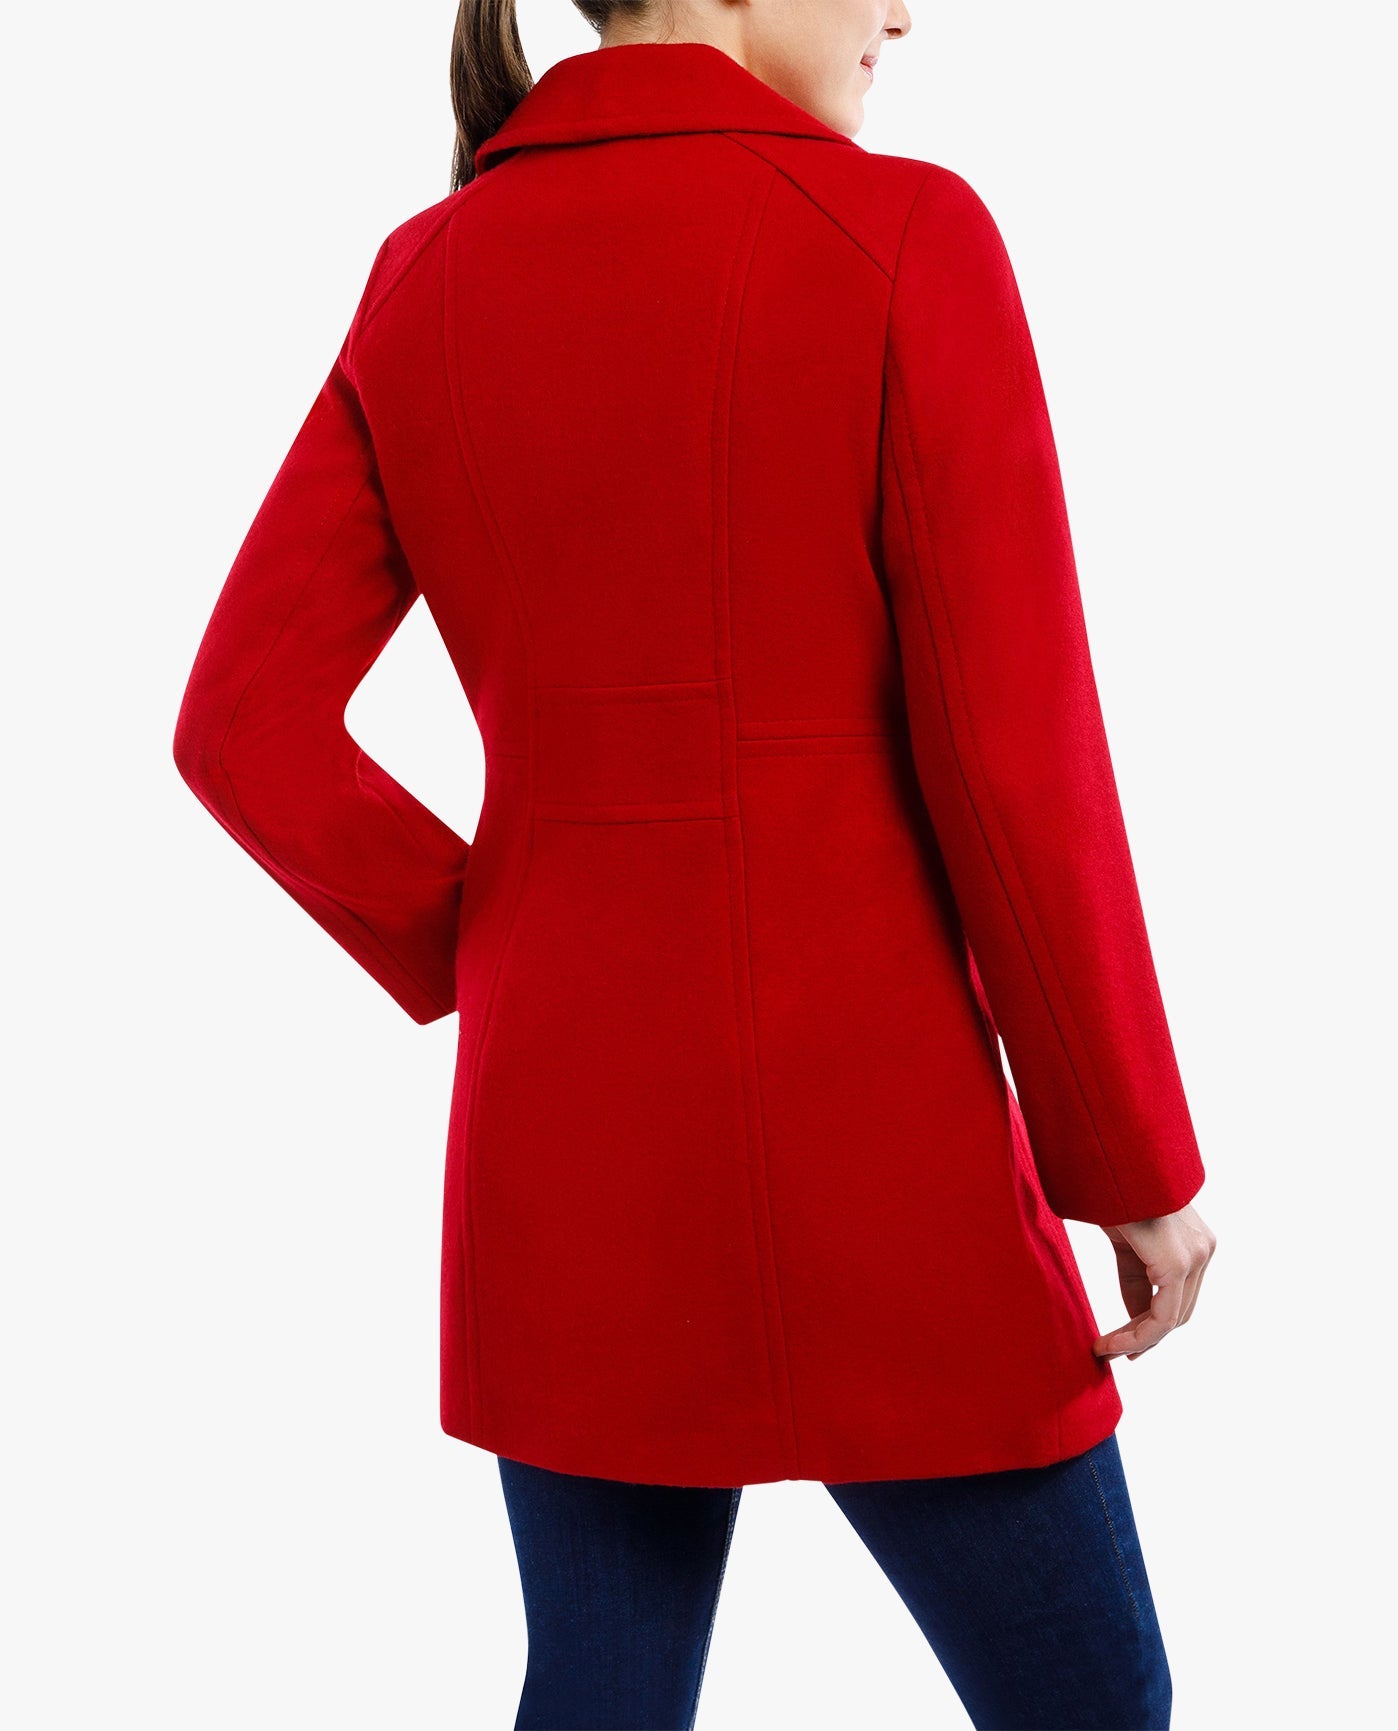 Back View Of SINGLE BREASTED PEACOAT | RED